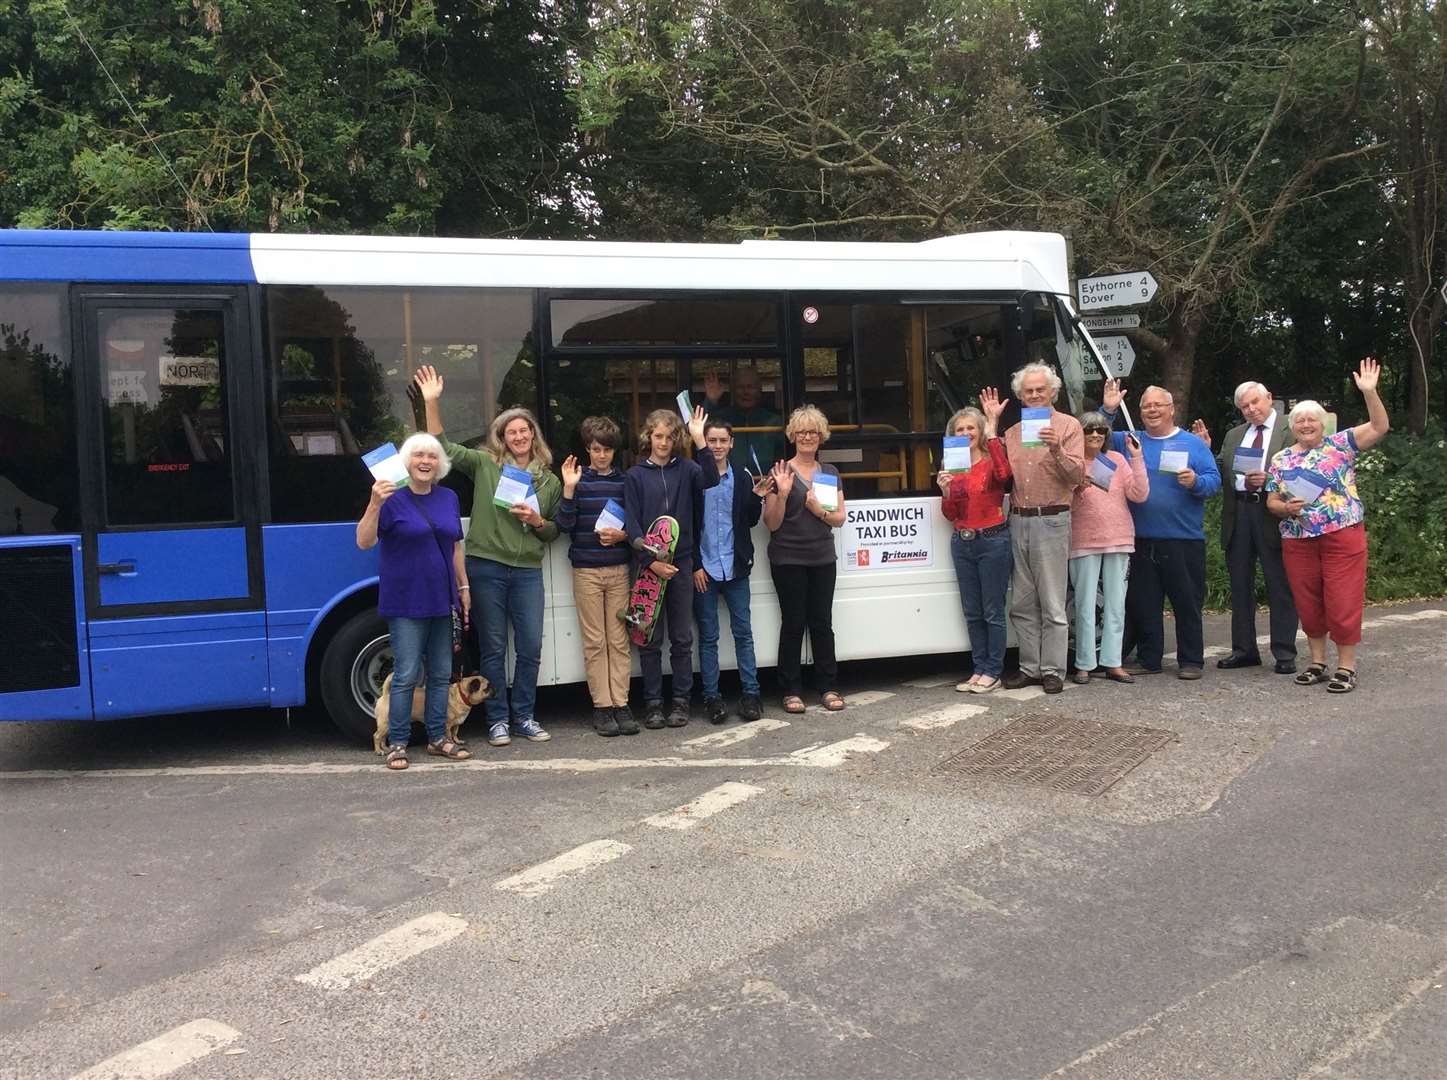 Residents say the new service will combat isolation in the village